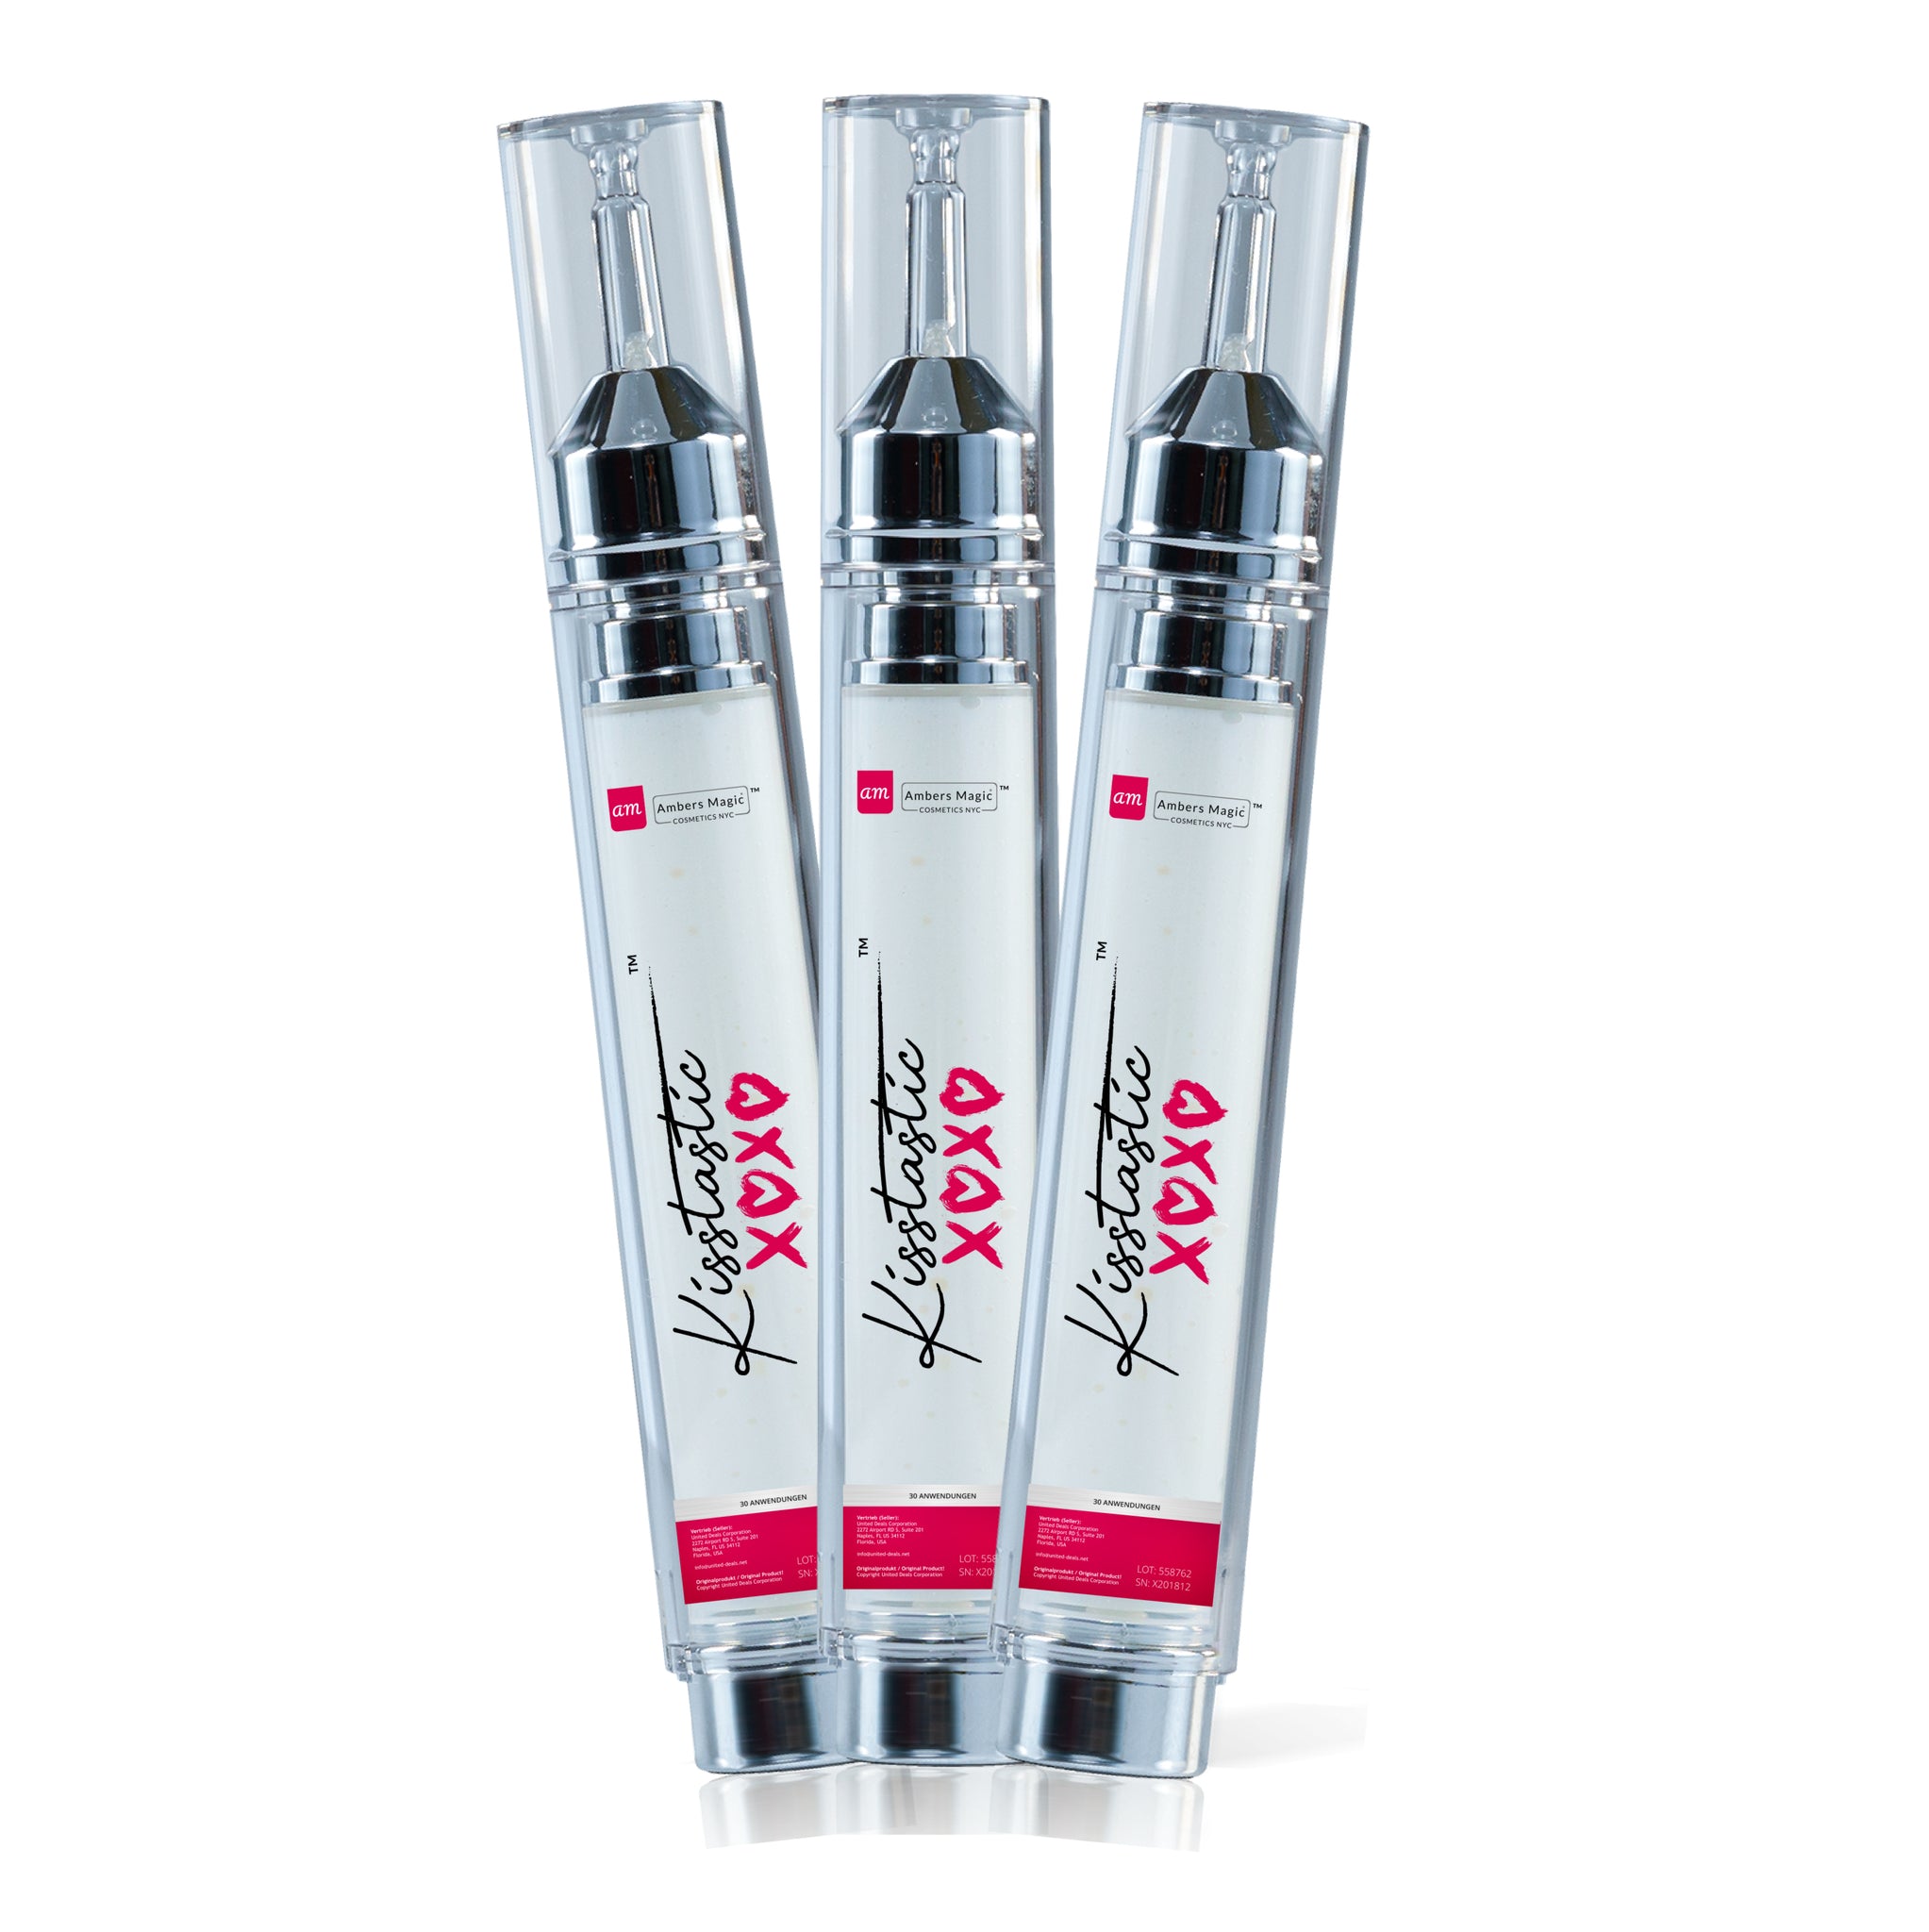 Kisstastic® - the original lip booster with Btxless technology